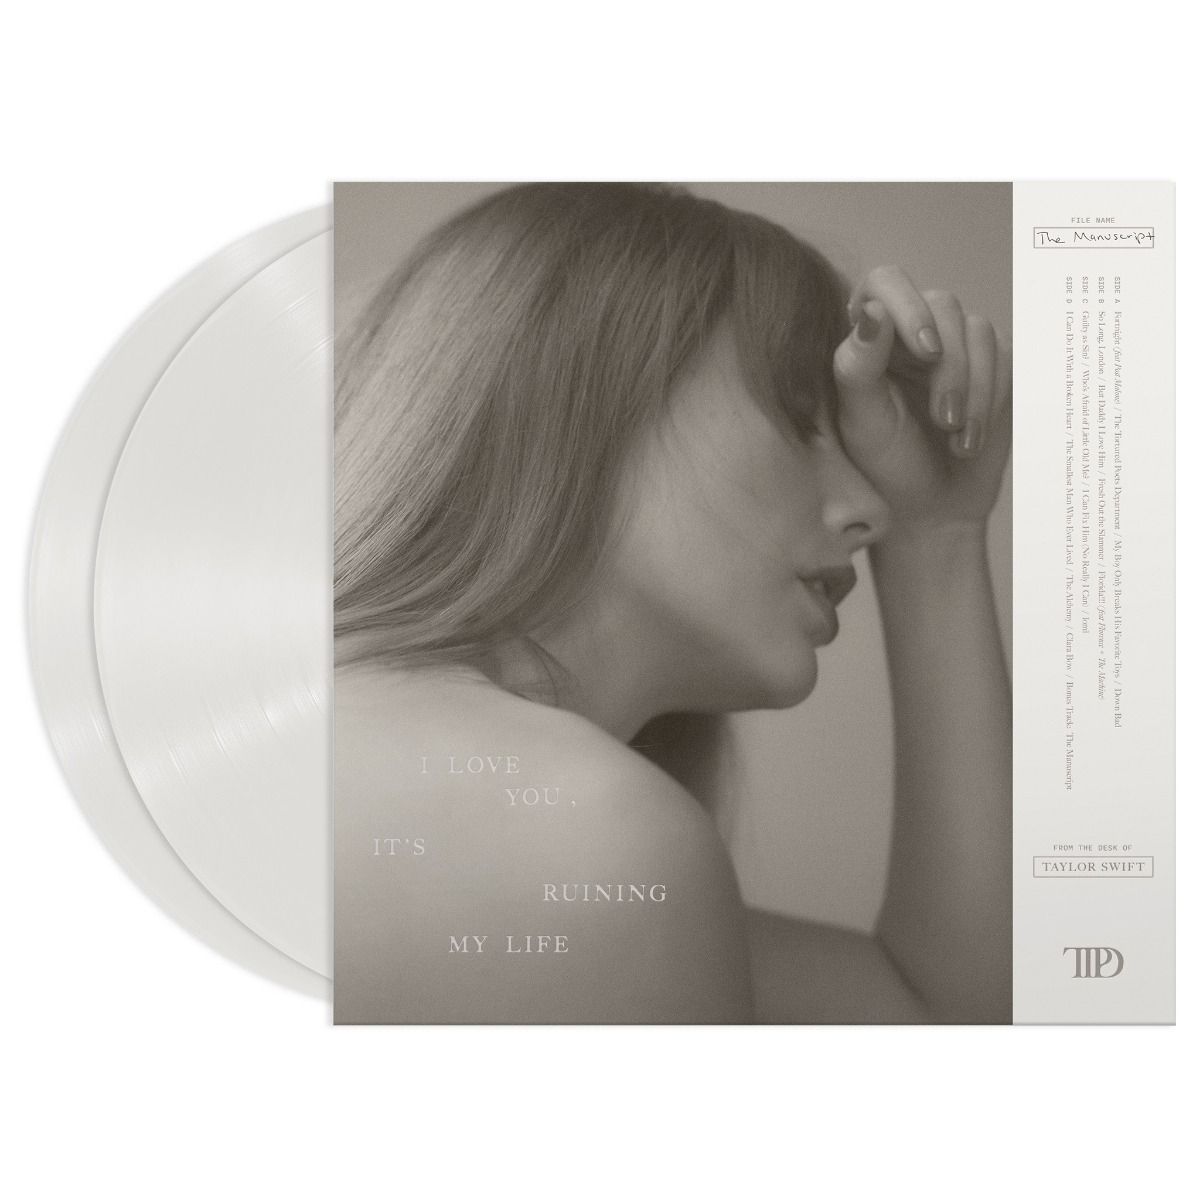 NEW/SEALED! Taylor Swift - THE TORTURED POETS DEPARTMENT [Ghosted White 2 LP]